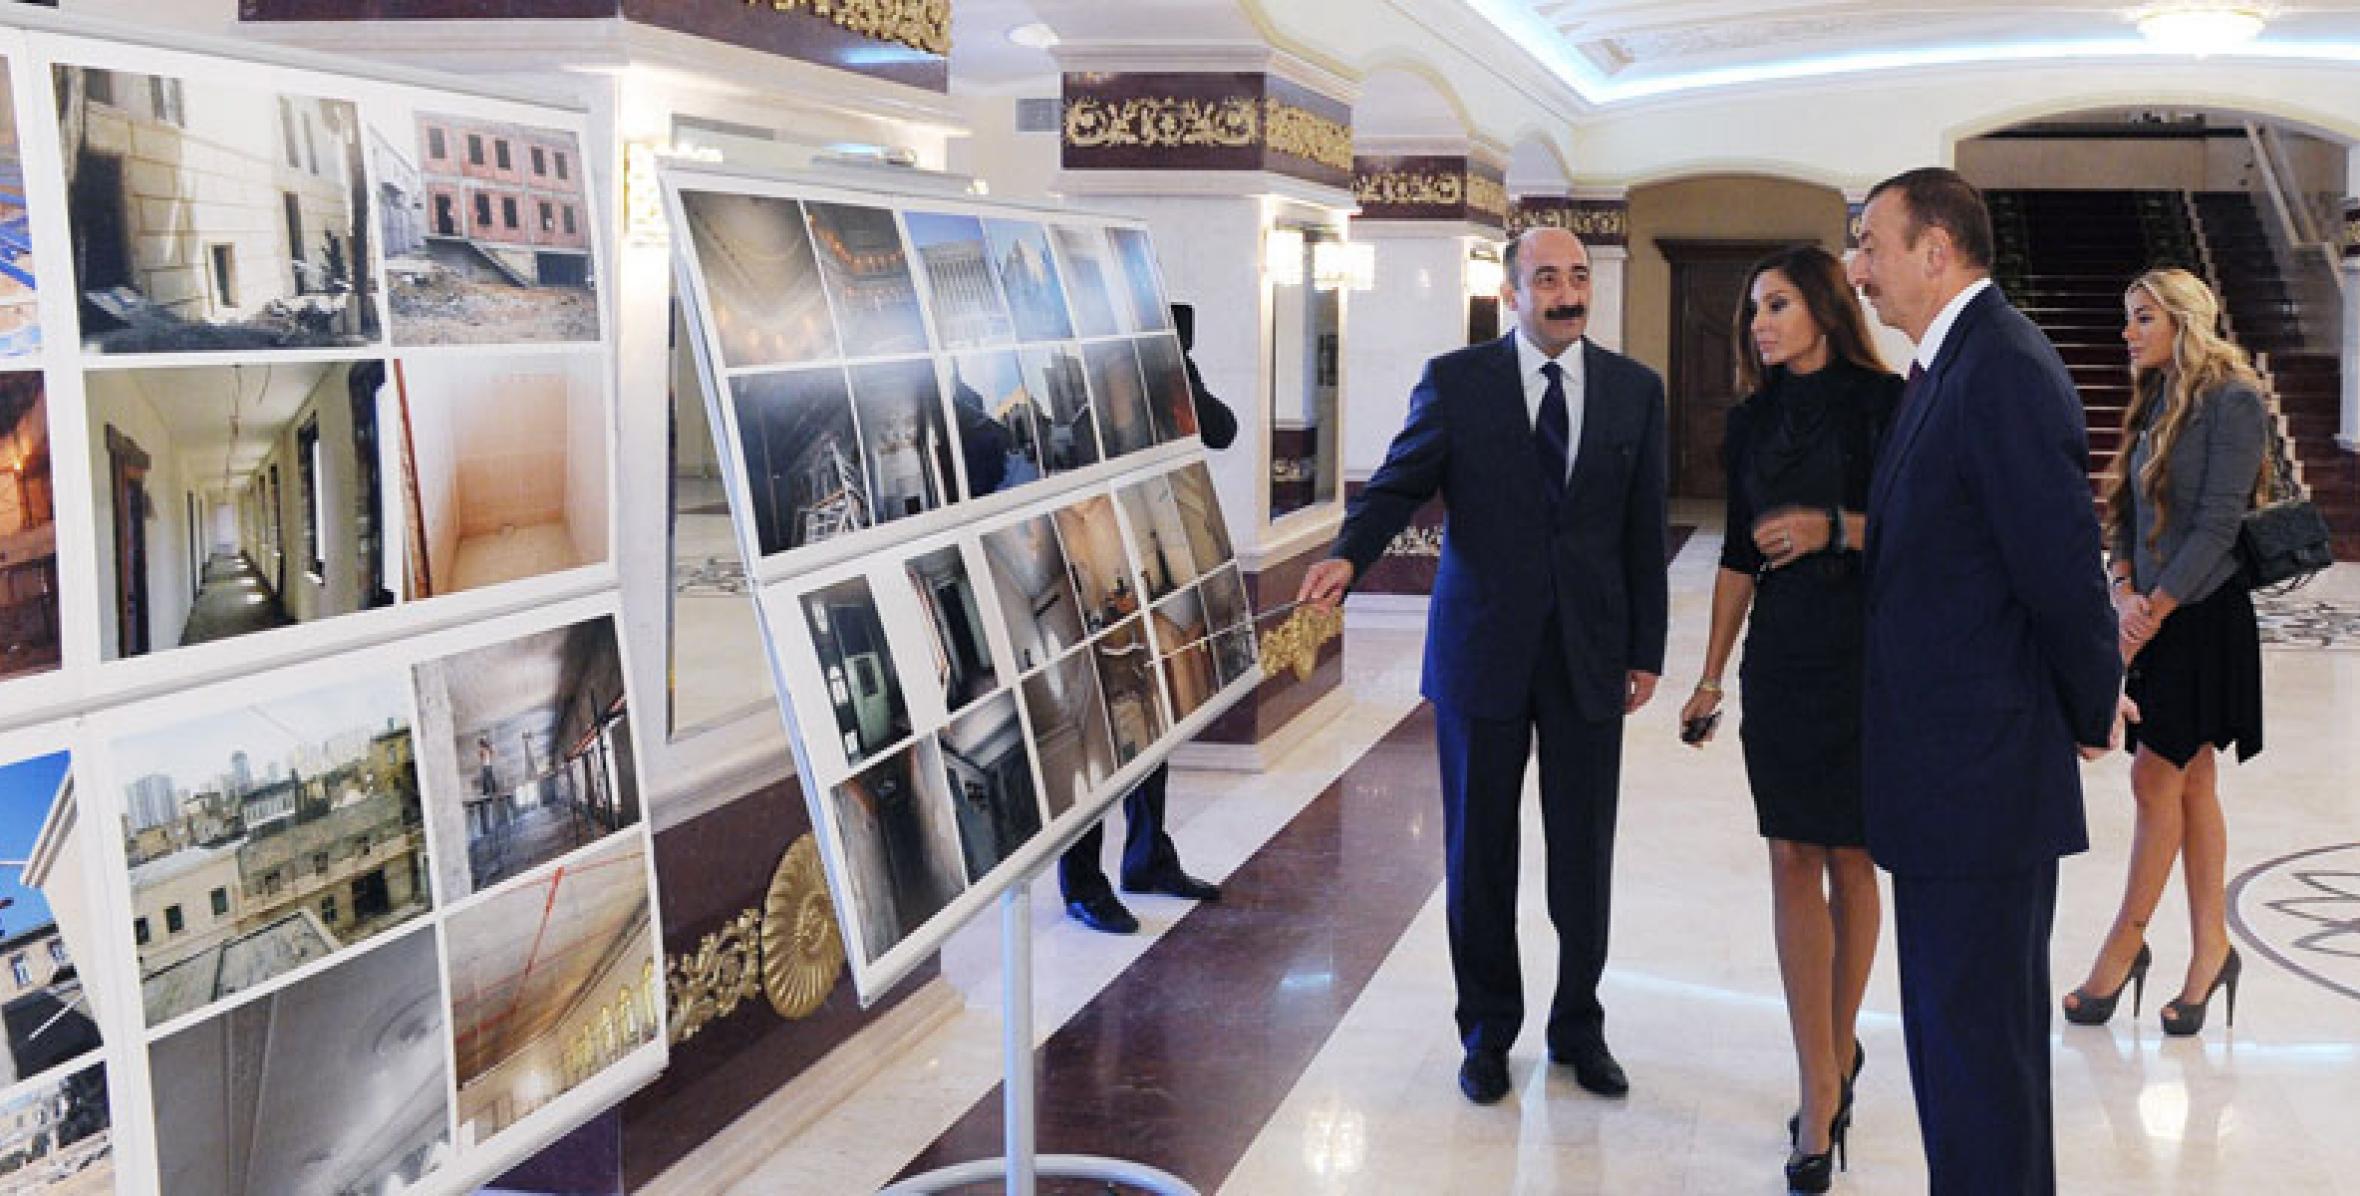 Ilham Aliyev attended the opening of the national drama theater